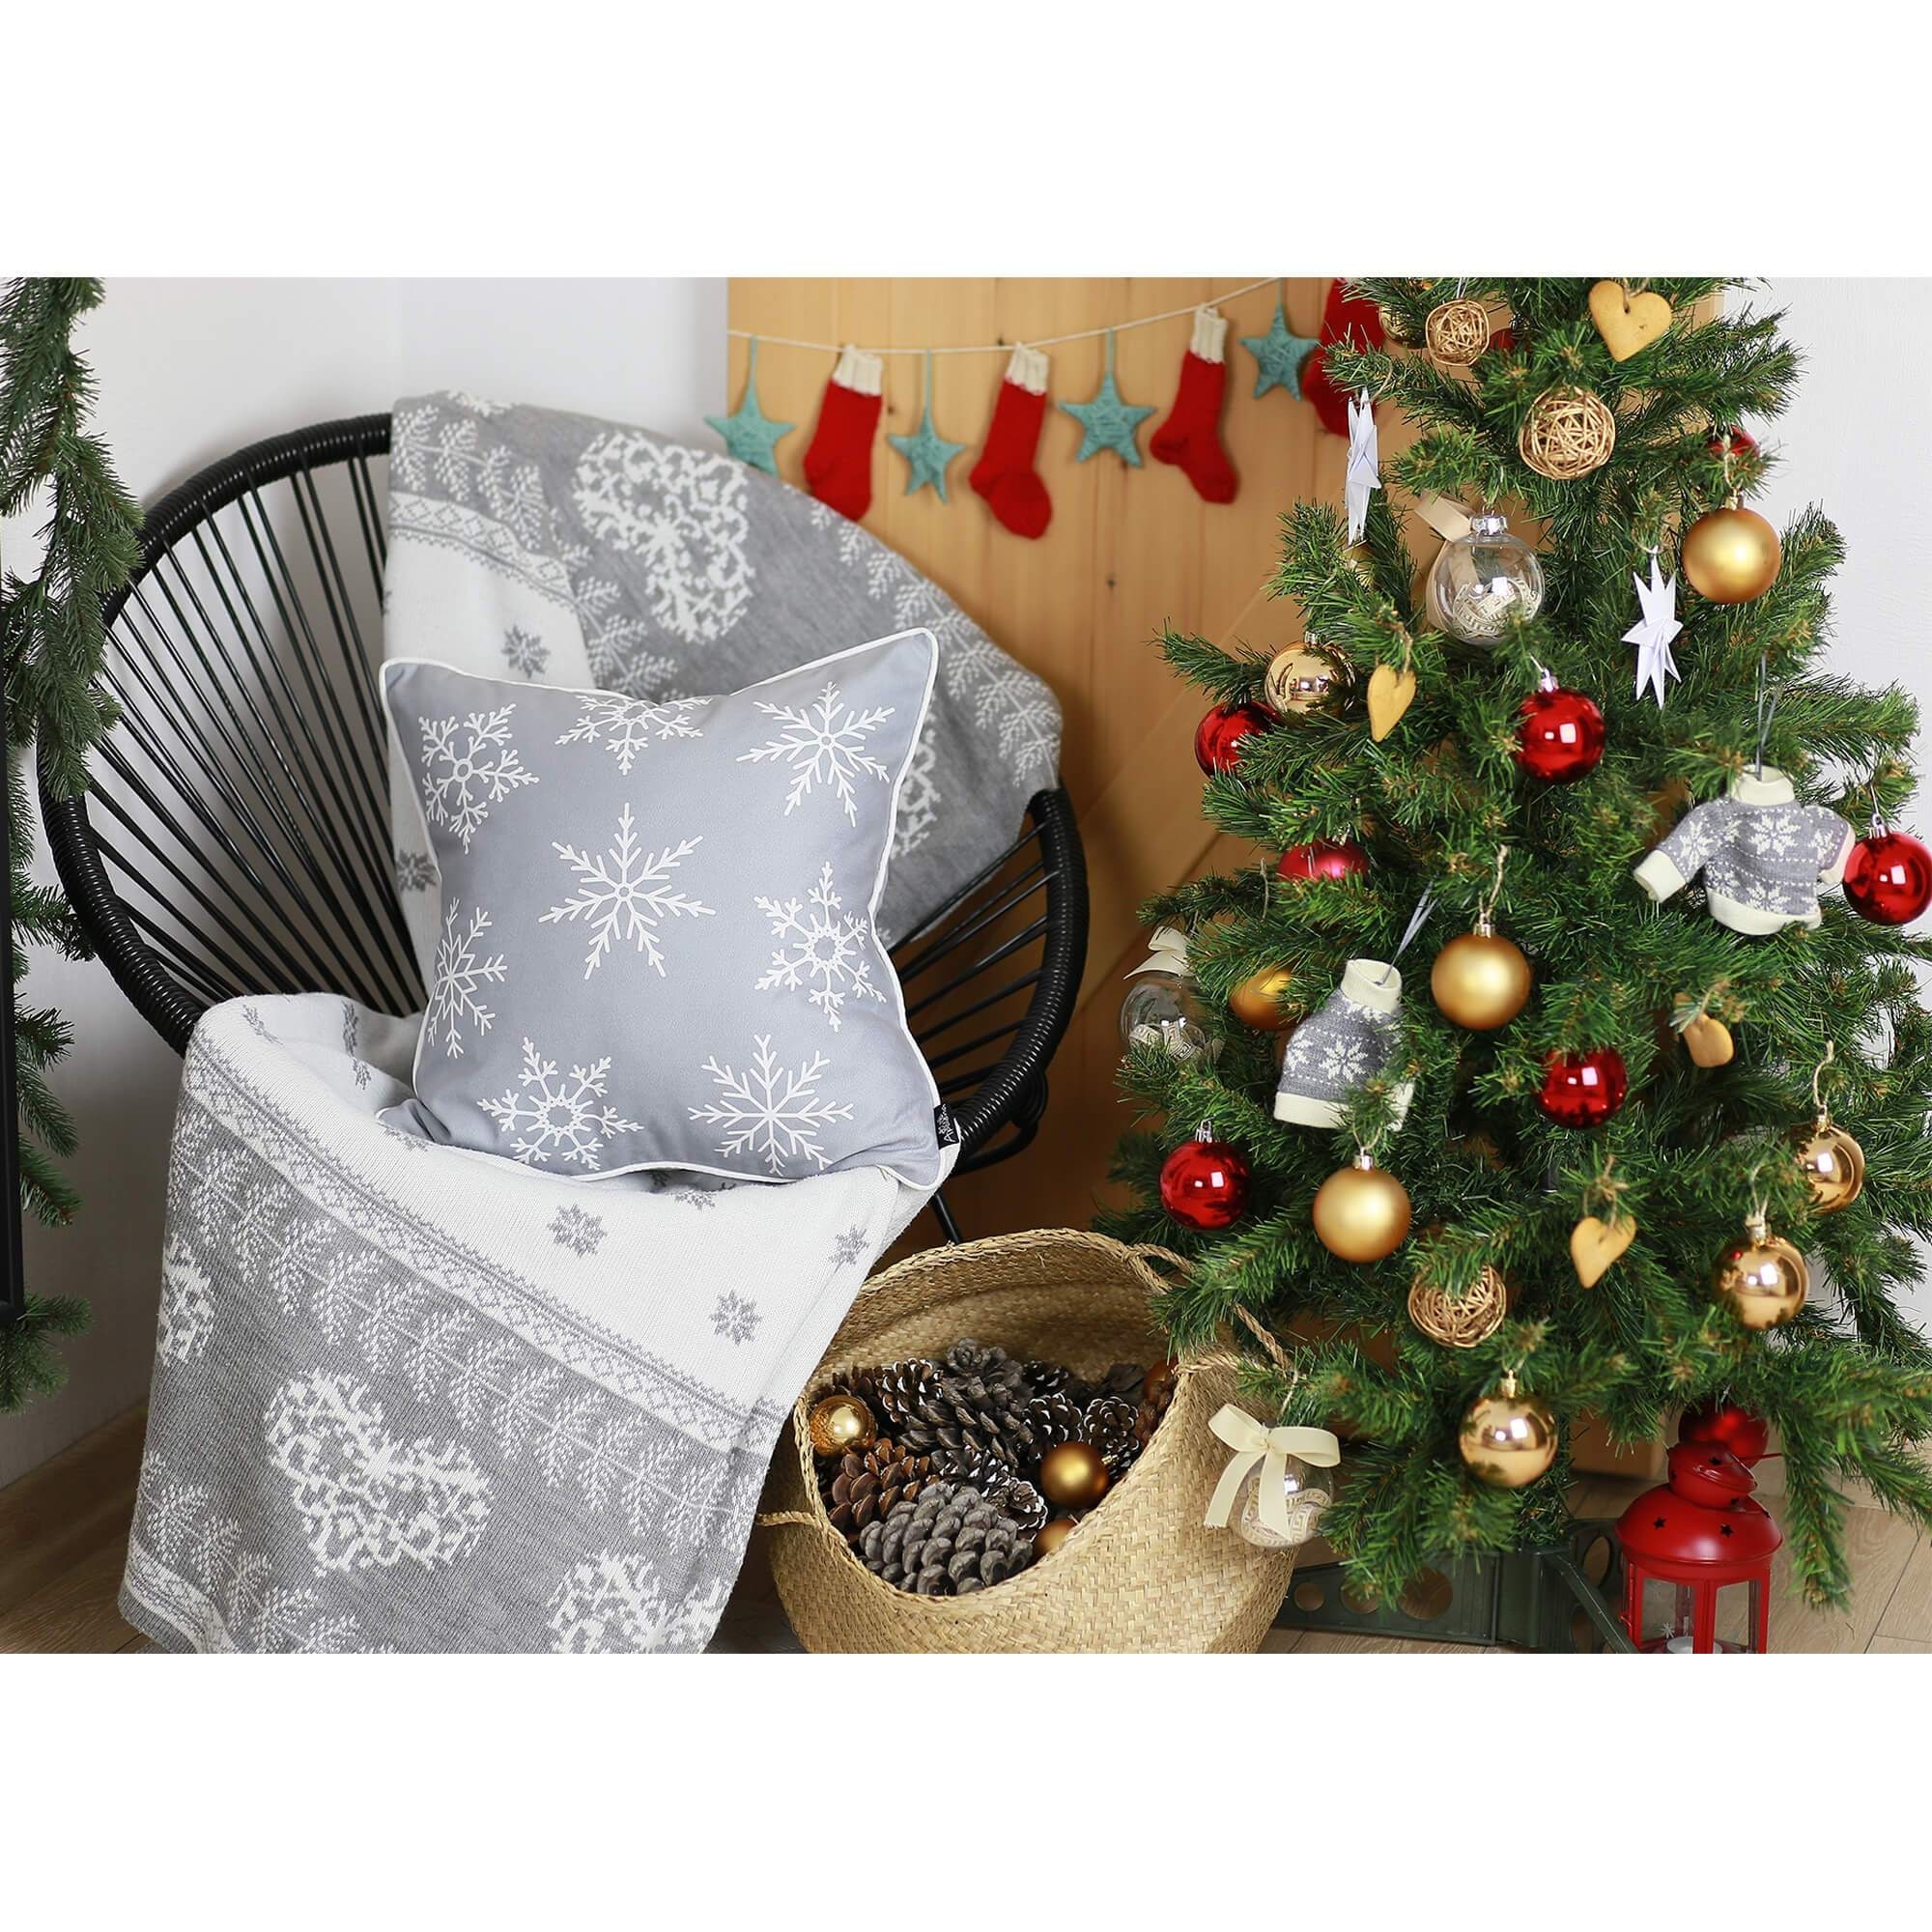 https://ak1.ostkcdn.com/images/products/is/images/direct/46ecb5e35c922c4f2f67d7639edf7319e6971929/Snowflakes-Throw-Pillow-Cover-18%22x18%22-%282-pcs-in-set%29-Christmas-Gift.jpg